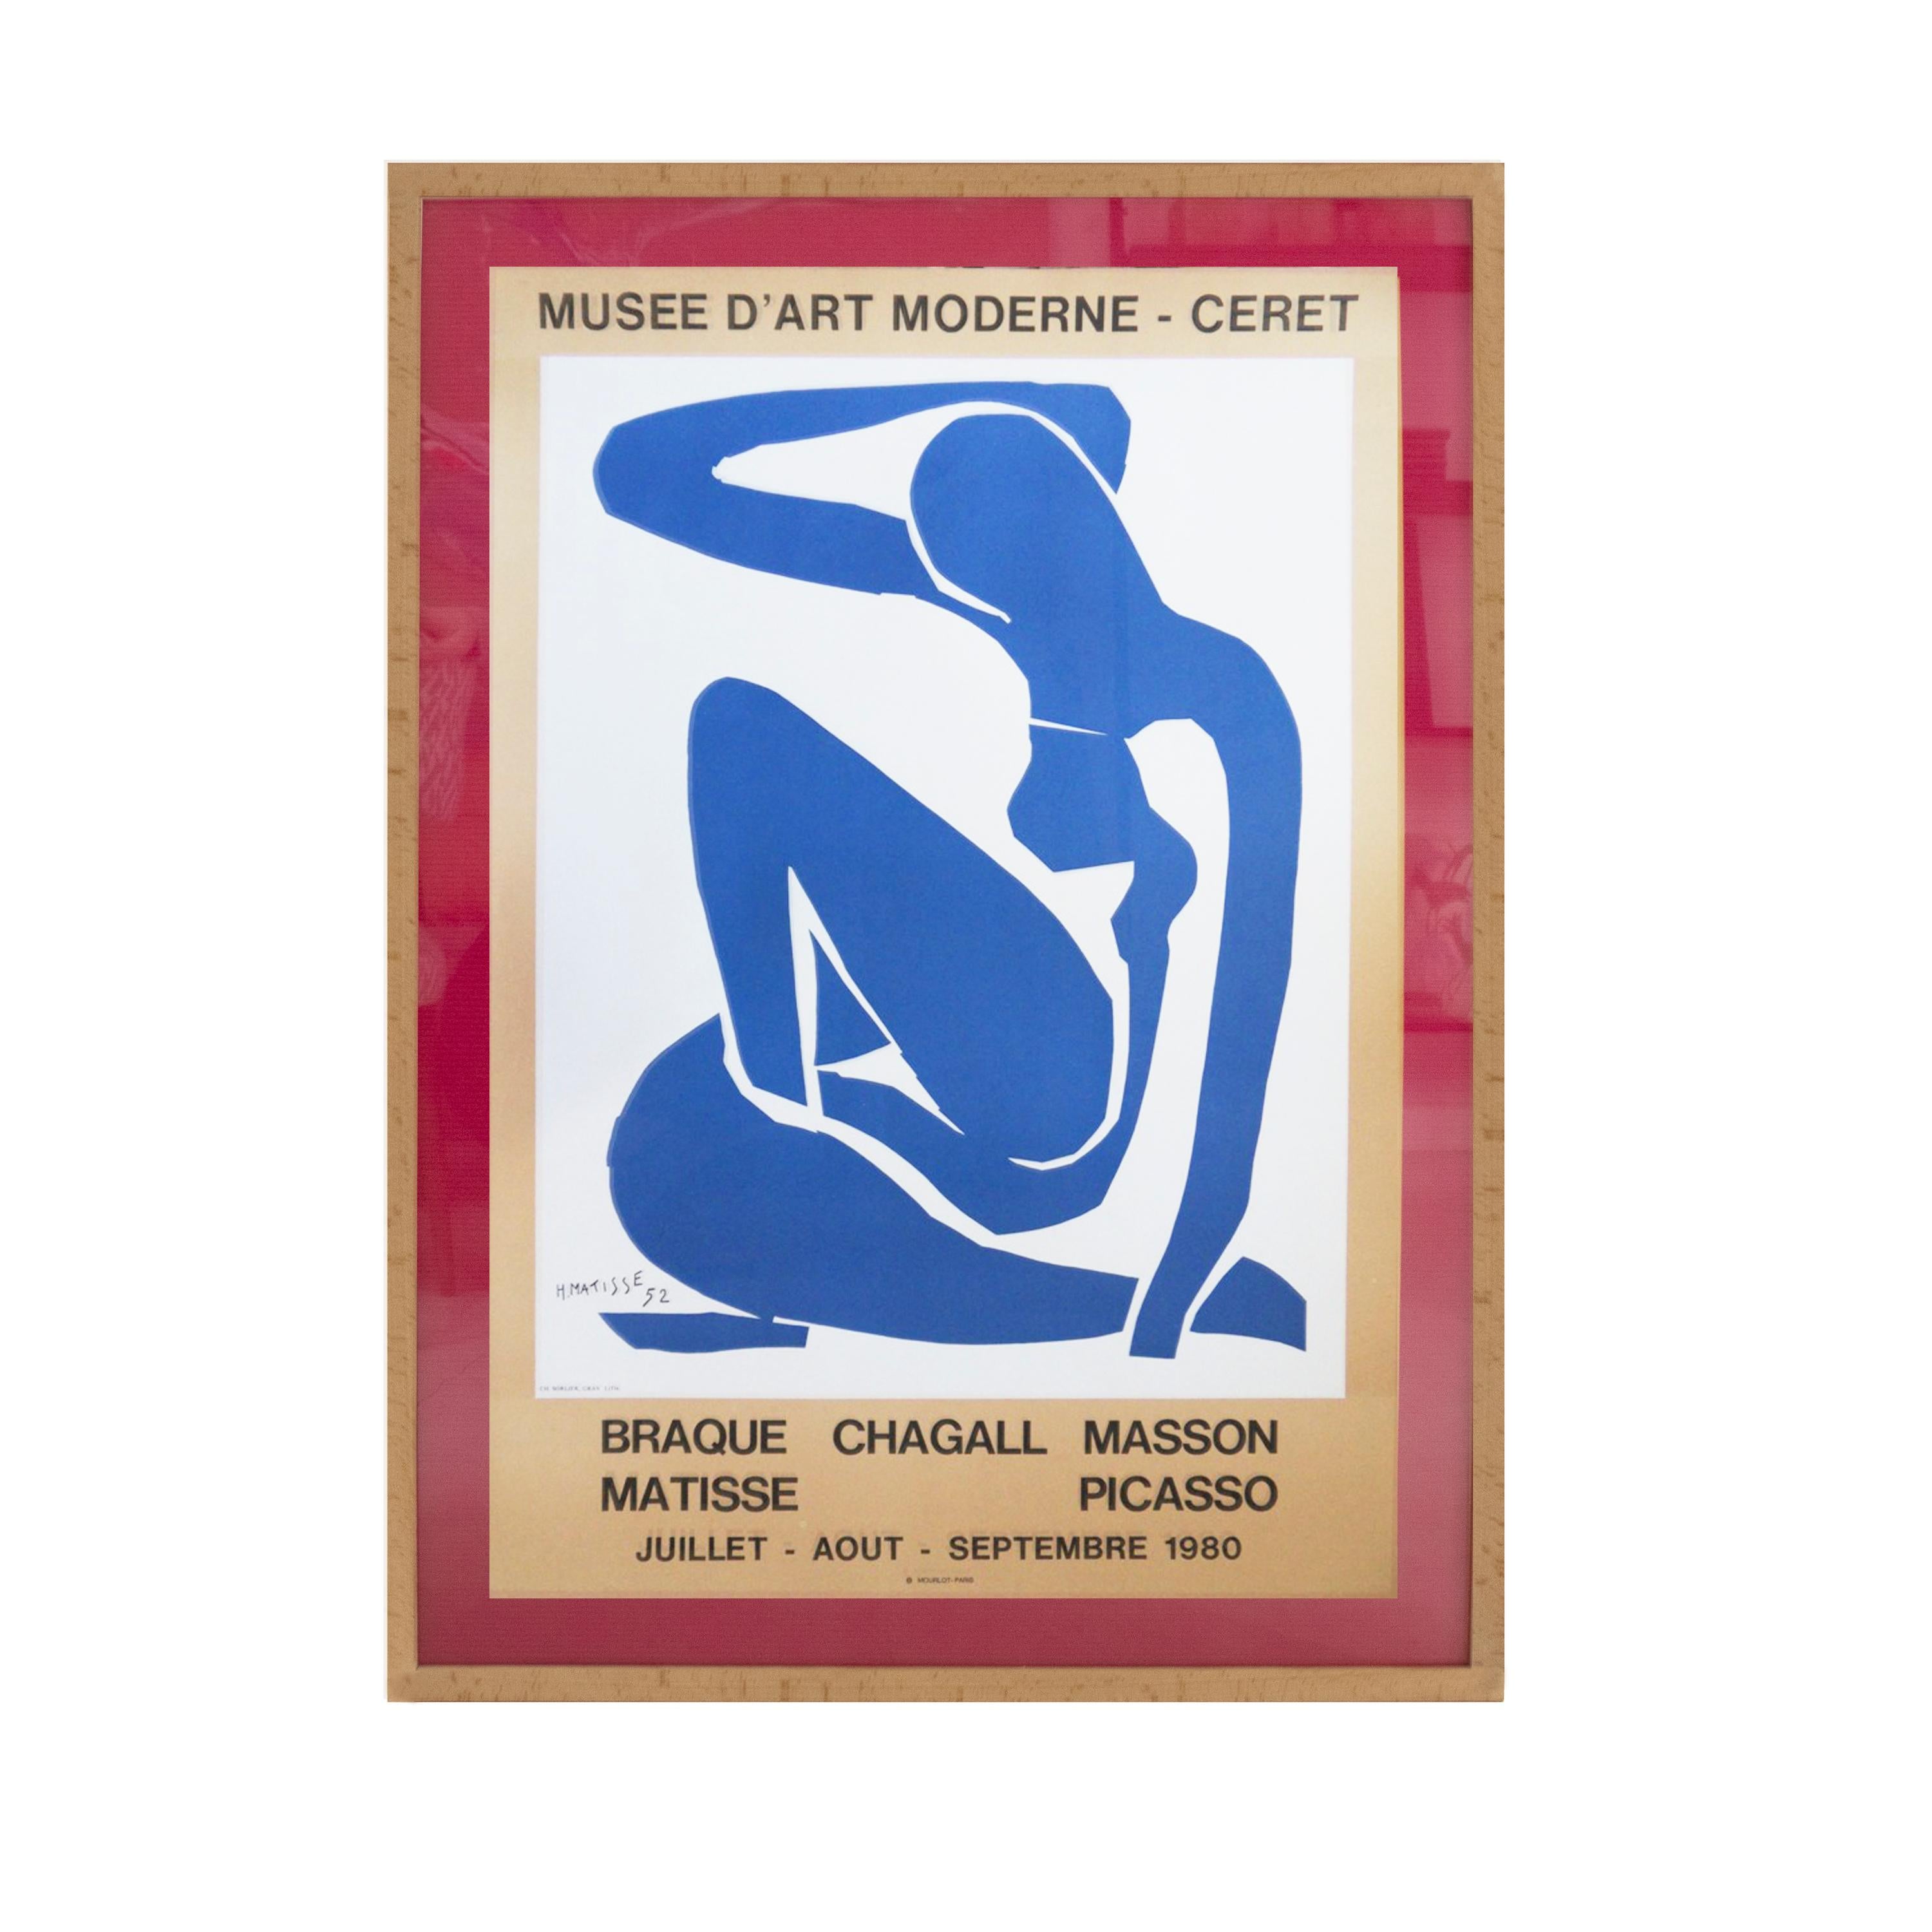 Original Lithograph Poster of Henri Matisse, printed by Mourlot for the Exhibition 